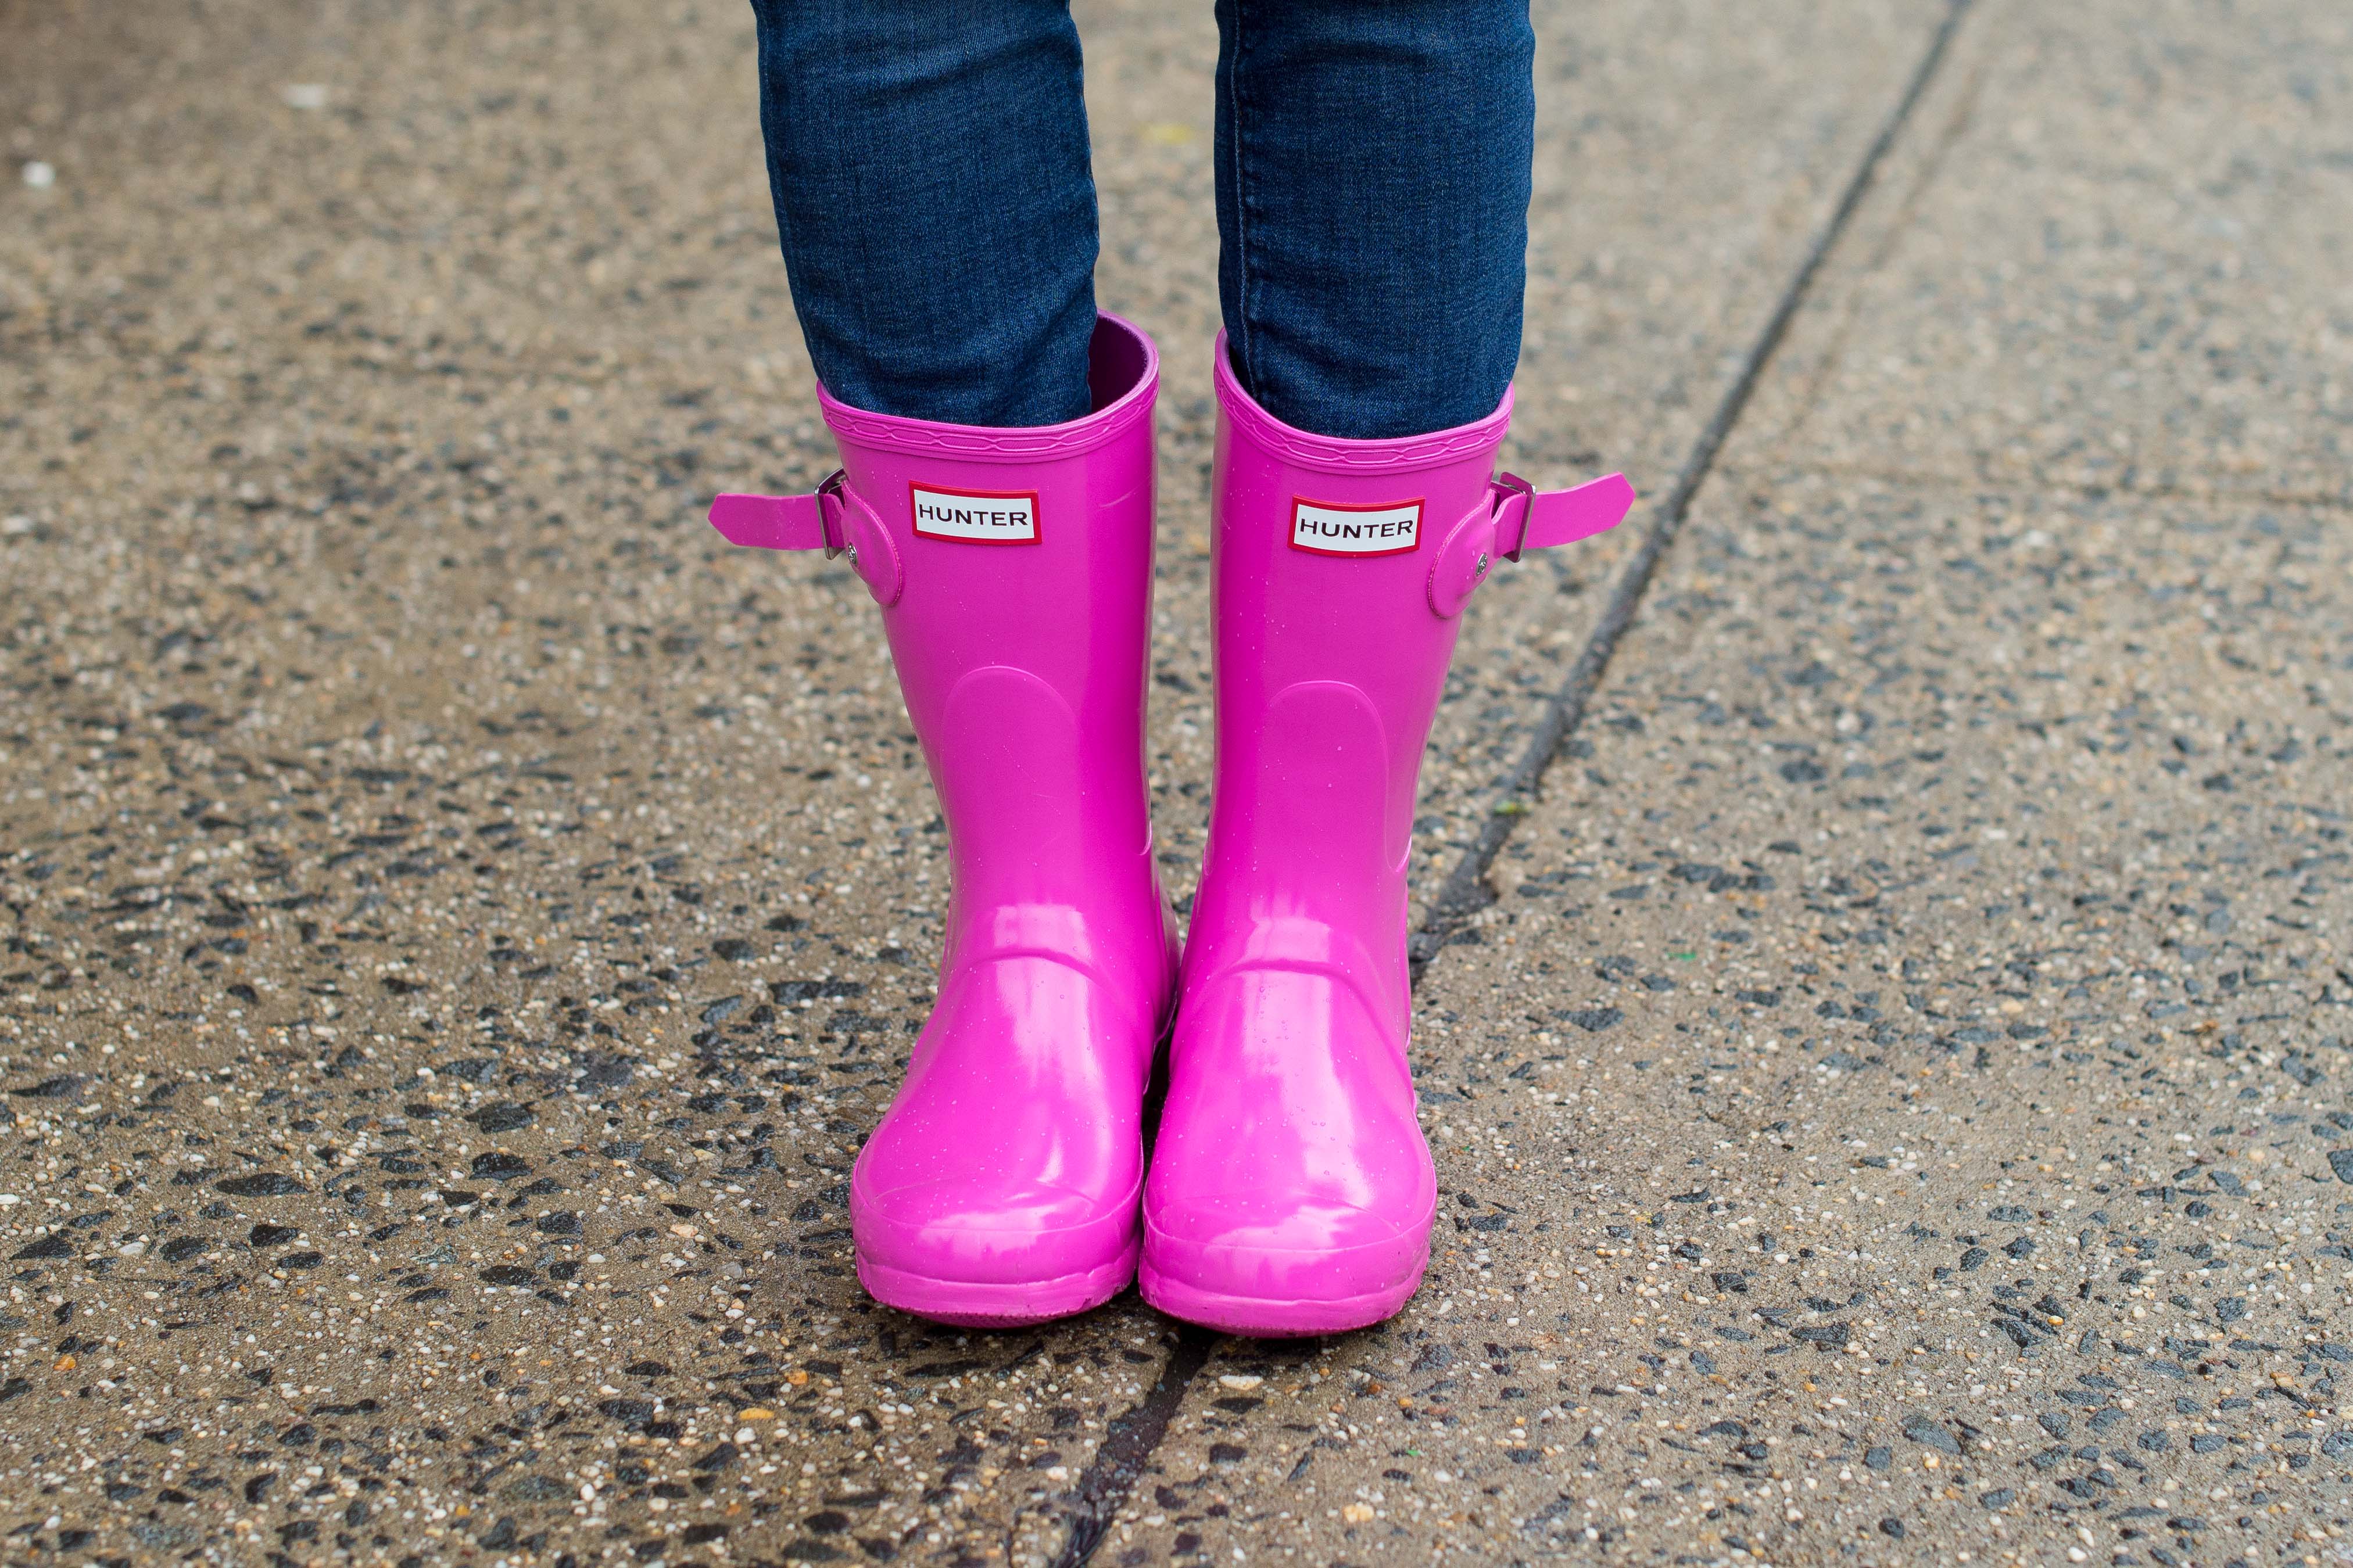 Guide to Buying Hunter Boots